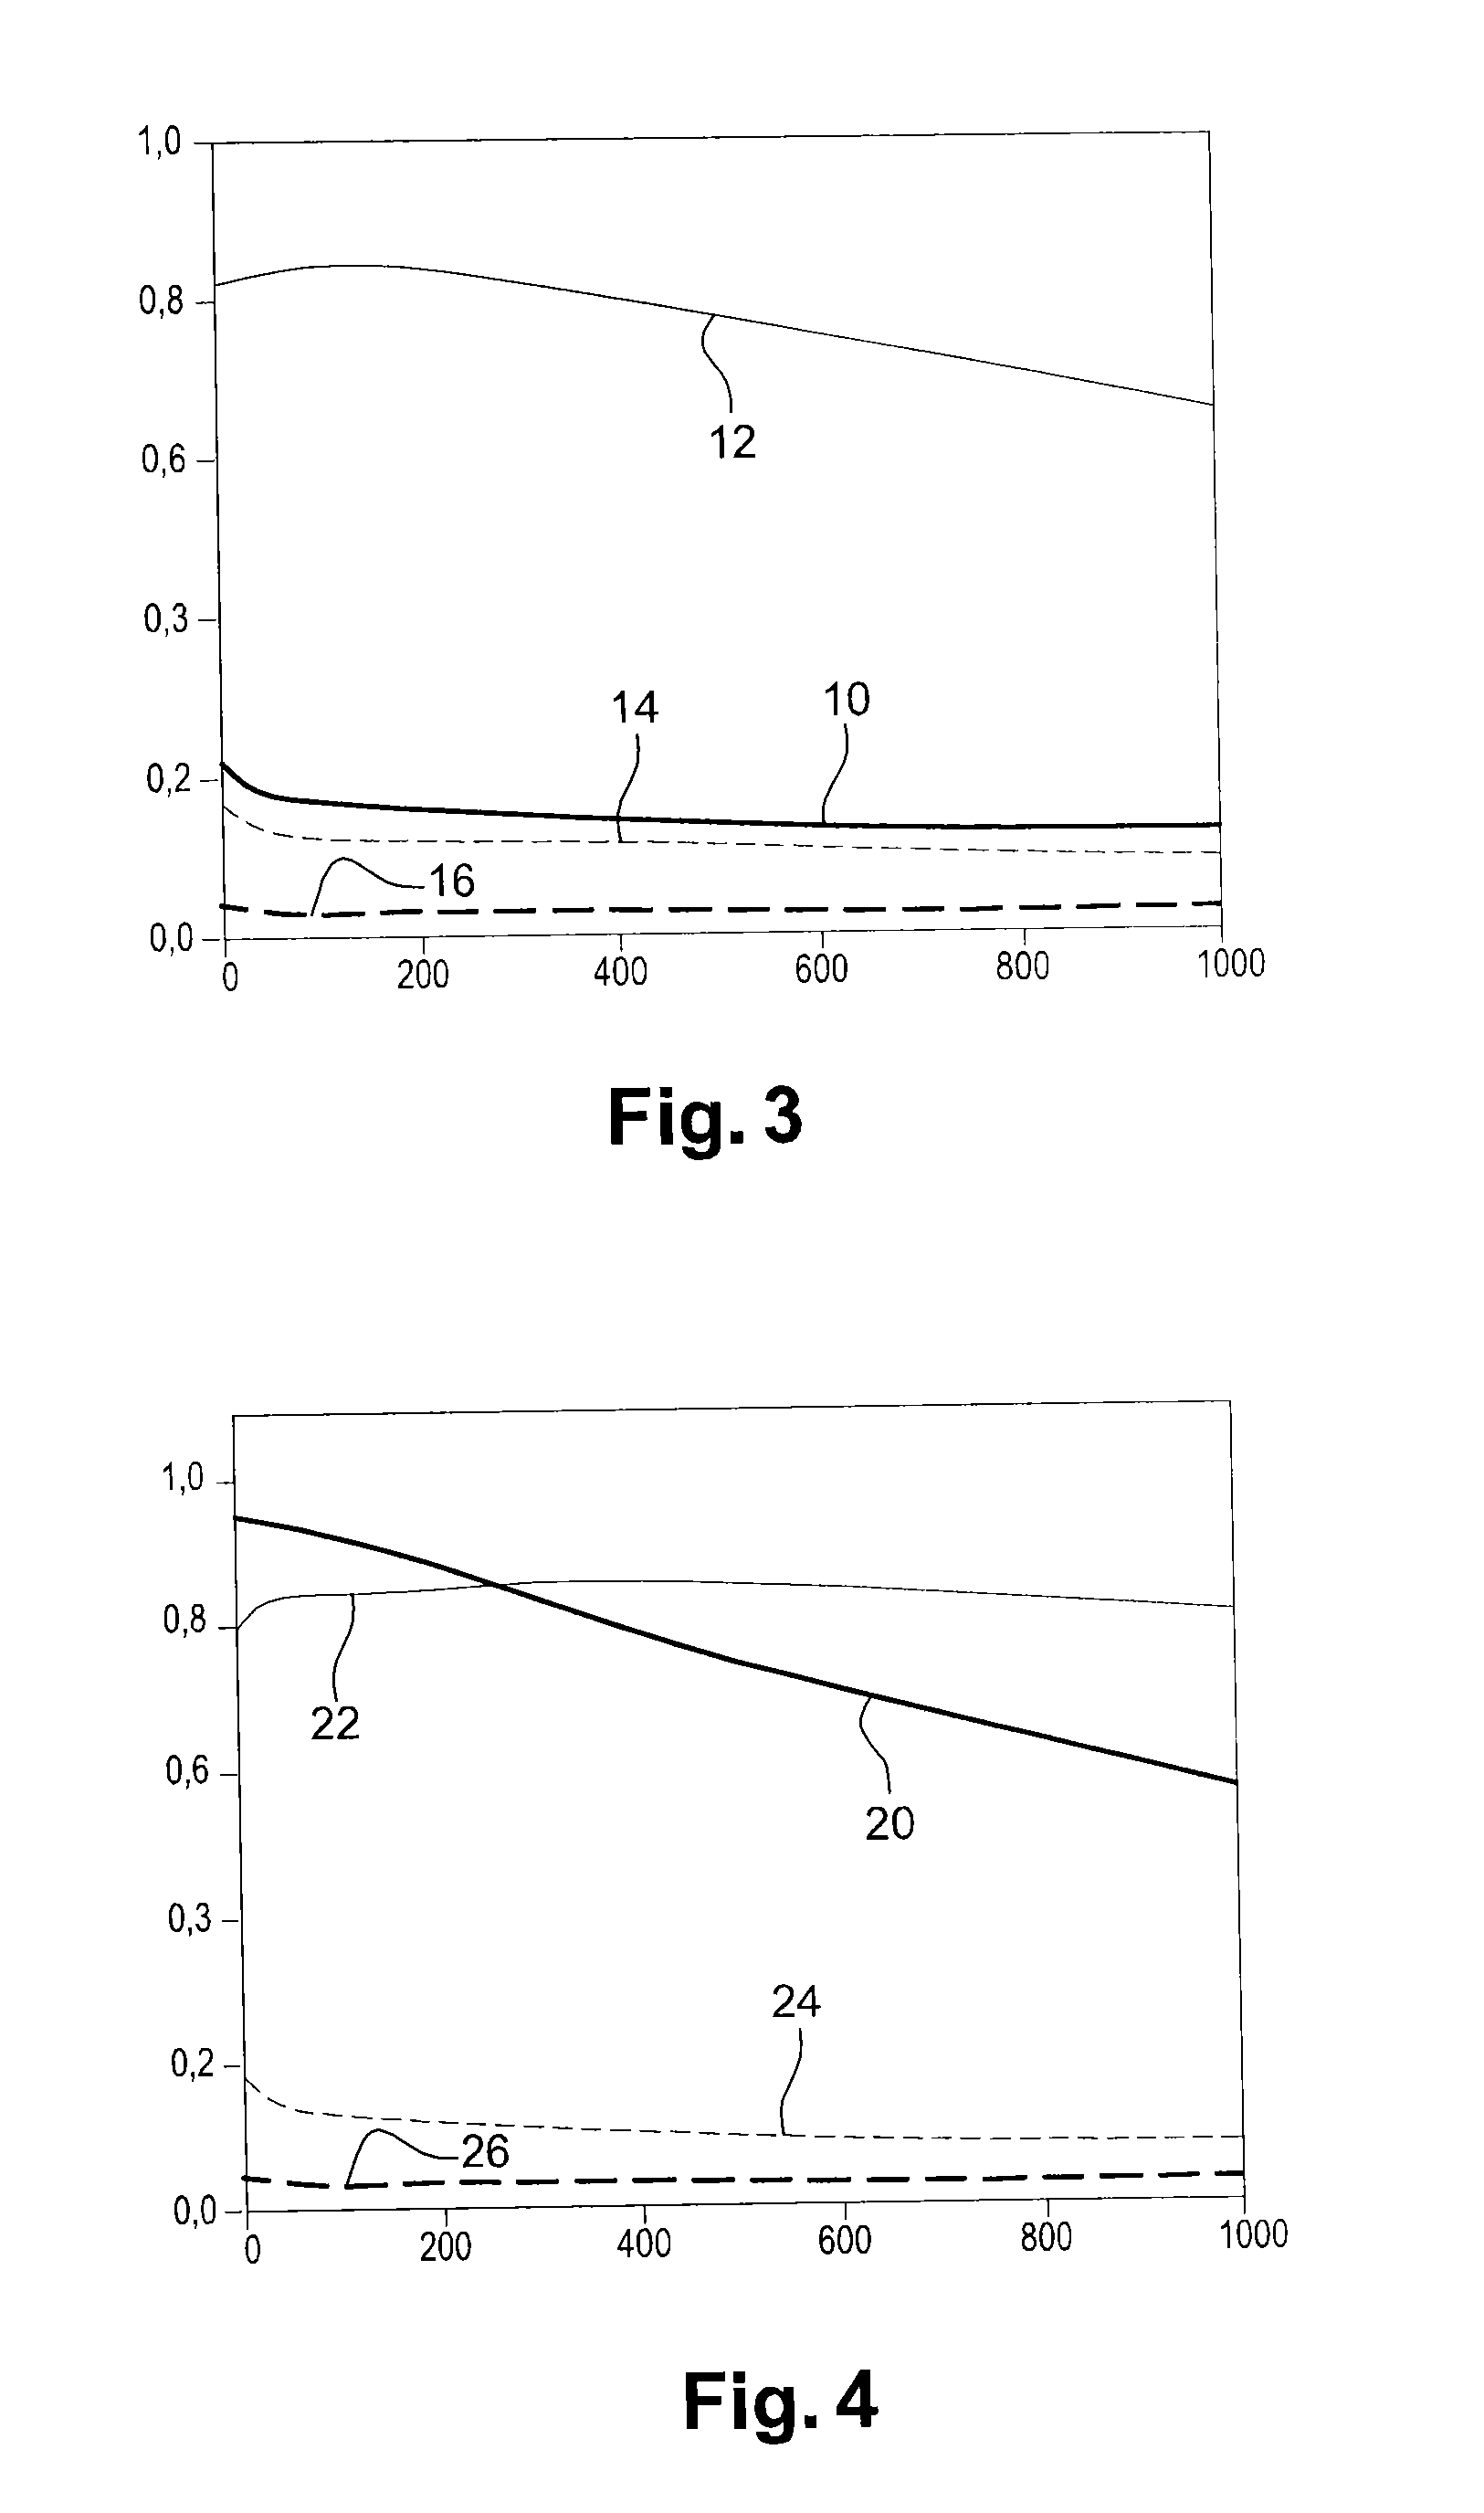 P-n junction optoelectronic device for ionizing dopants by field effect